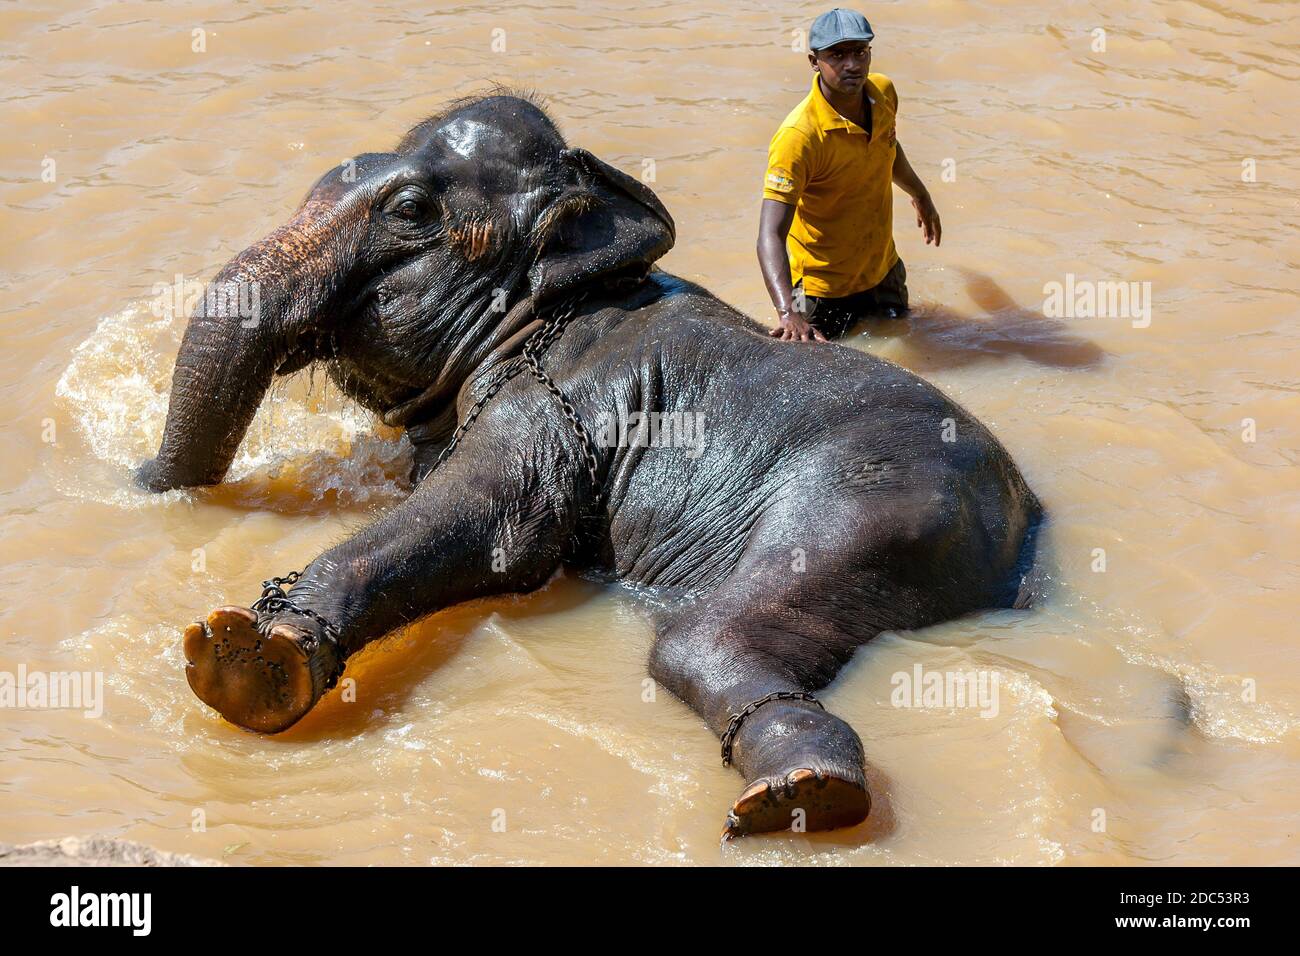 An elephant from the Pinnawala Elephant Orphanage bathes in the Maha Oya River in Sri Lanka. The elephants are taken twice daily to the river to bathe Stock Photo